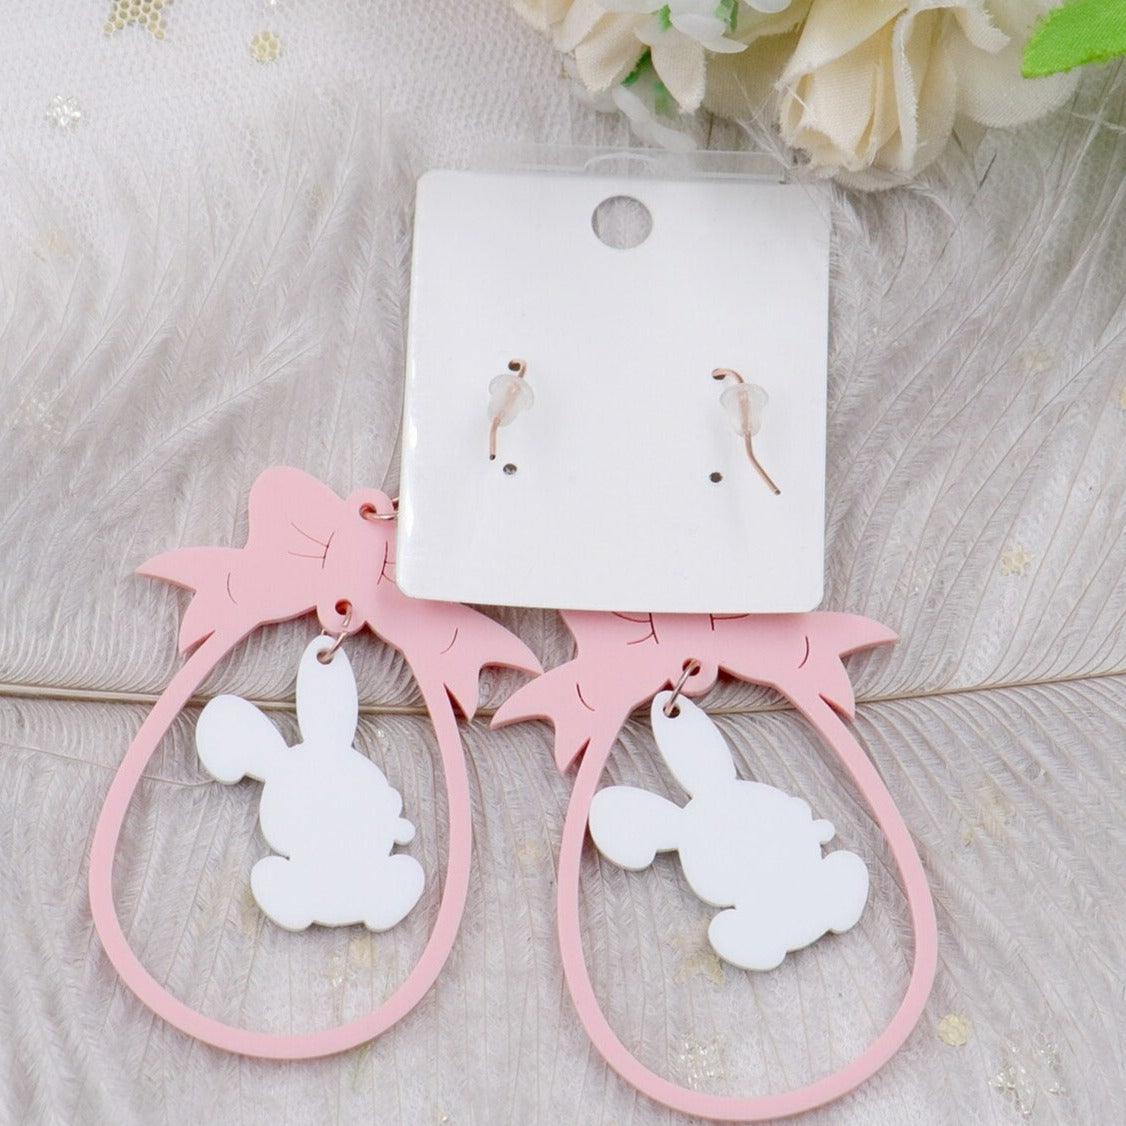 Carrot Cake and Pink Ribbons Fairycore Princesscore Cottagecore Earrings - Starlight Fair